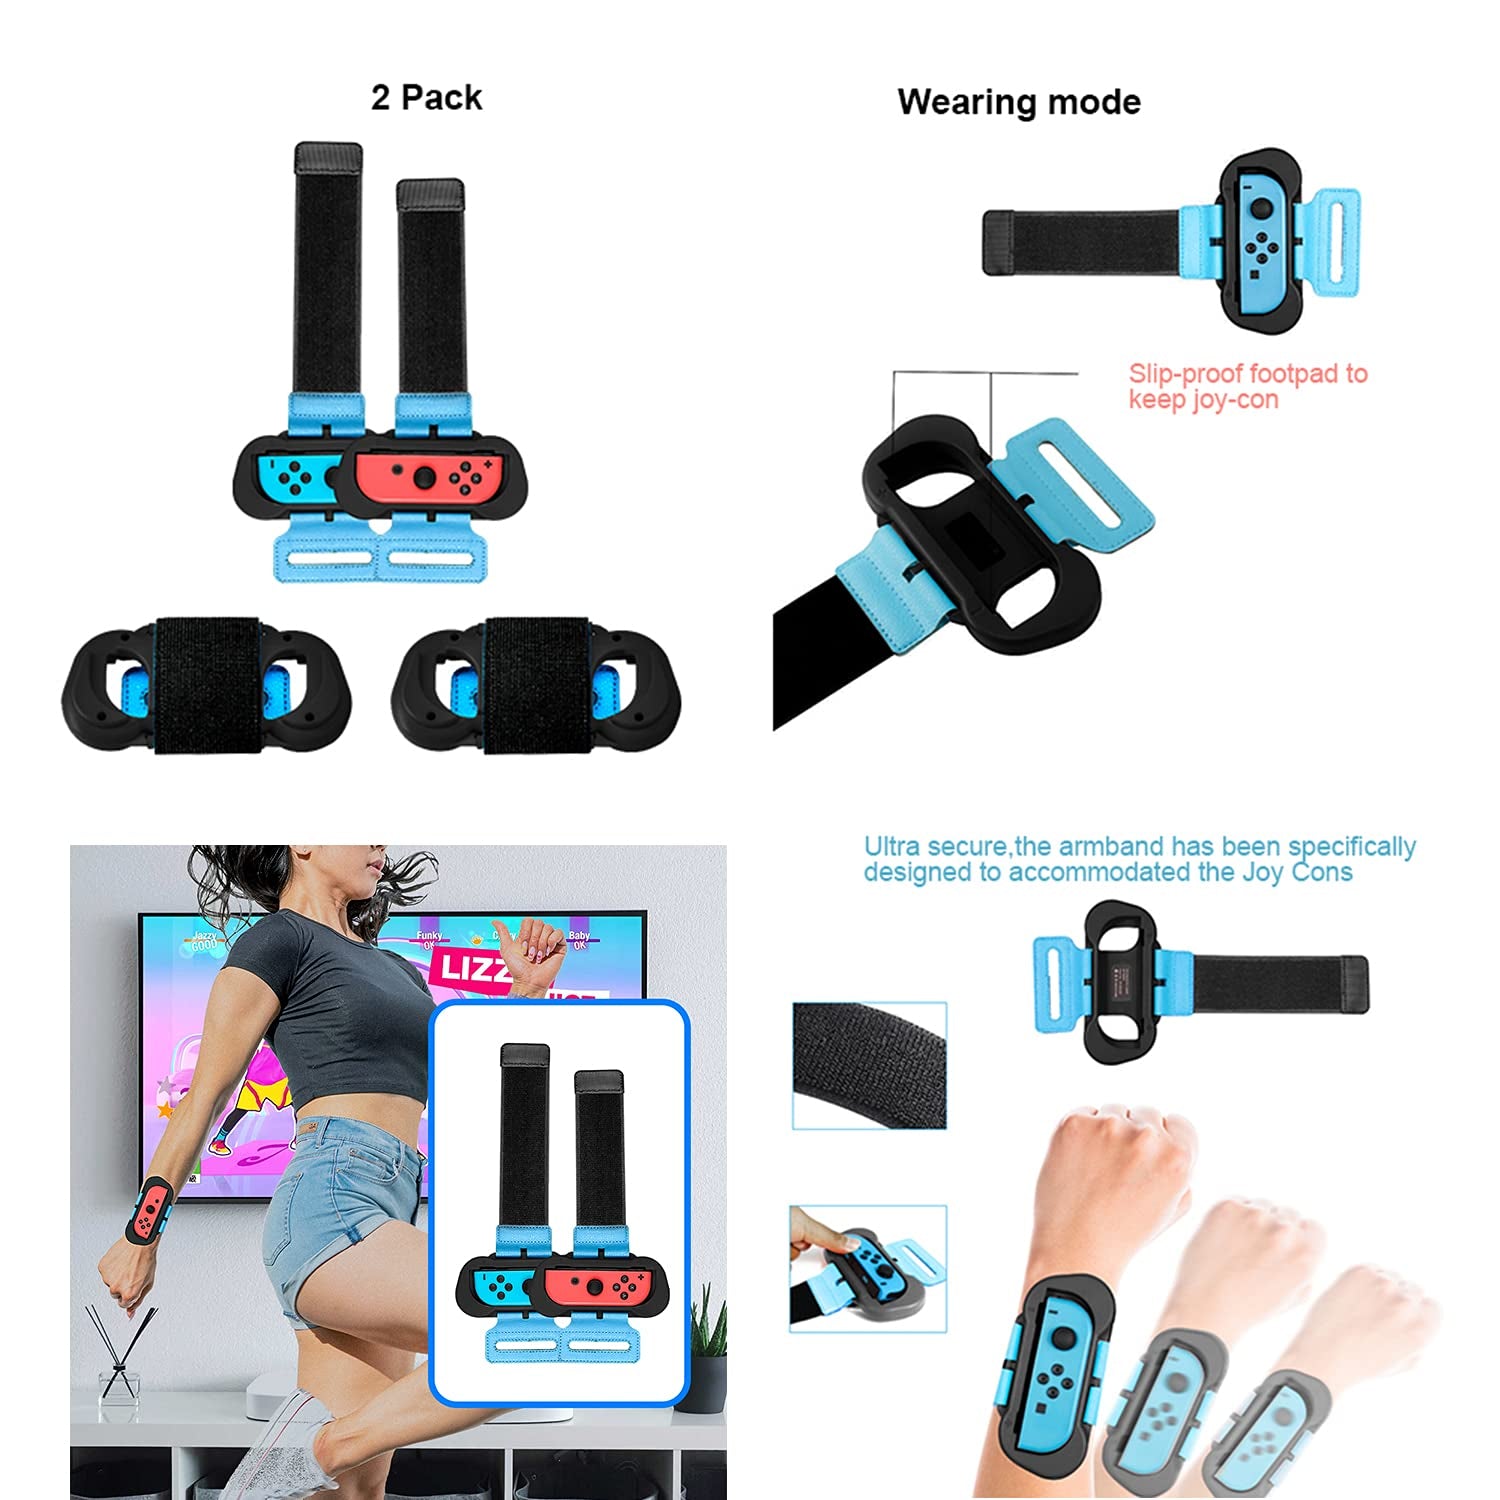 10 in1 Switch Sports Accessories Bundle, Family Kit for Nintendo Switch Sports Games, Mario Golf Golf Clubs, Just Dance Wrist Bands, Soccer Leg Straps, Tennis Rackets